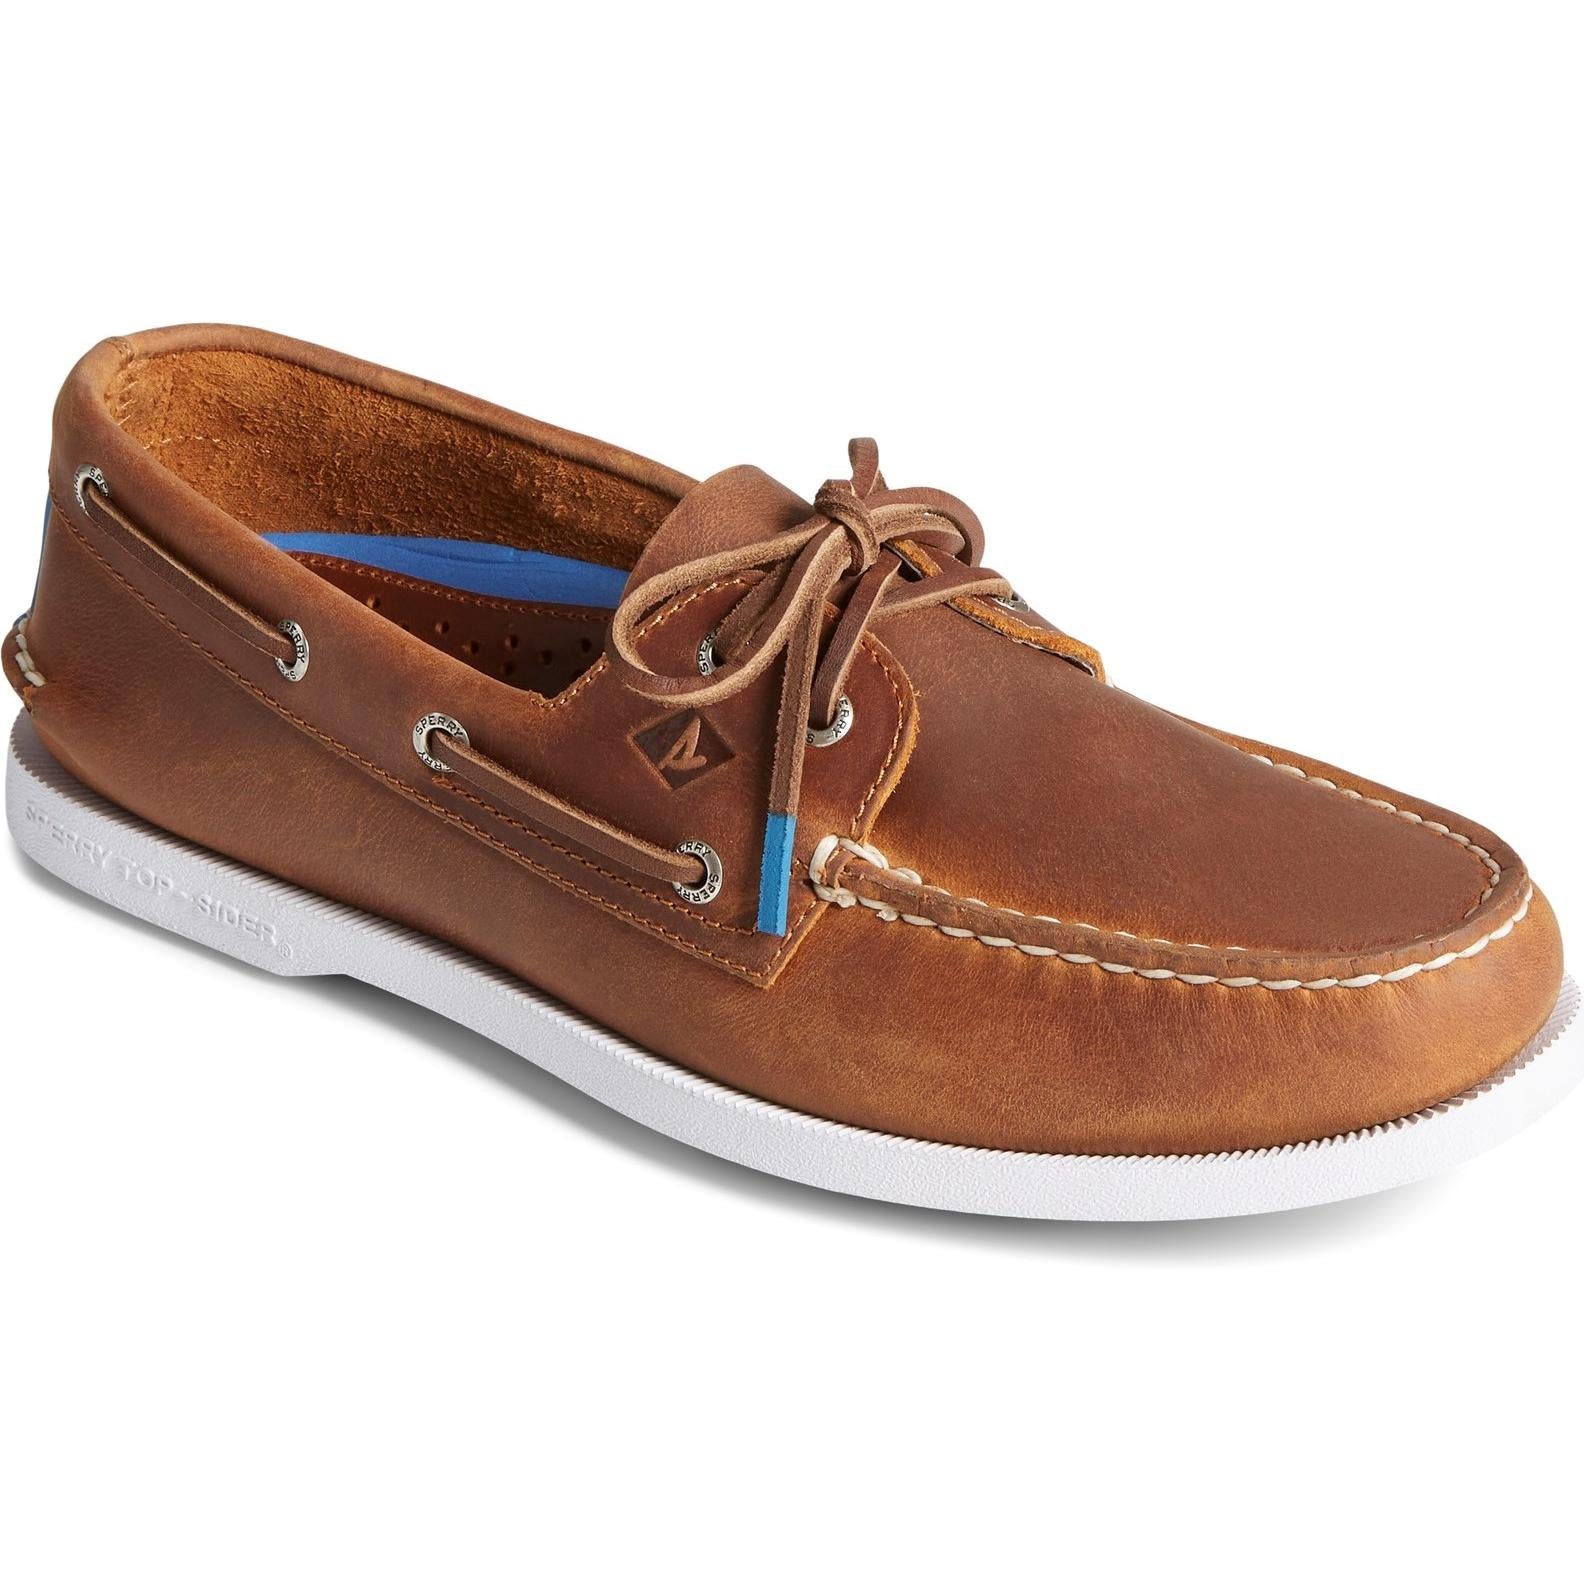 Sperry Top-sider Authentic Original 2-Eye Pullup Shoes